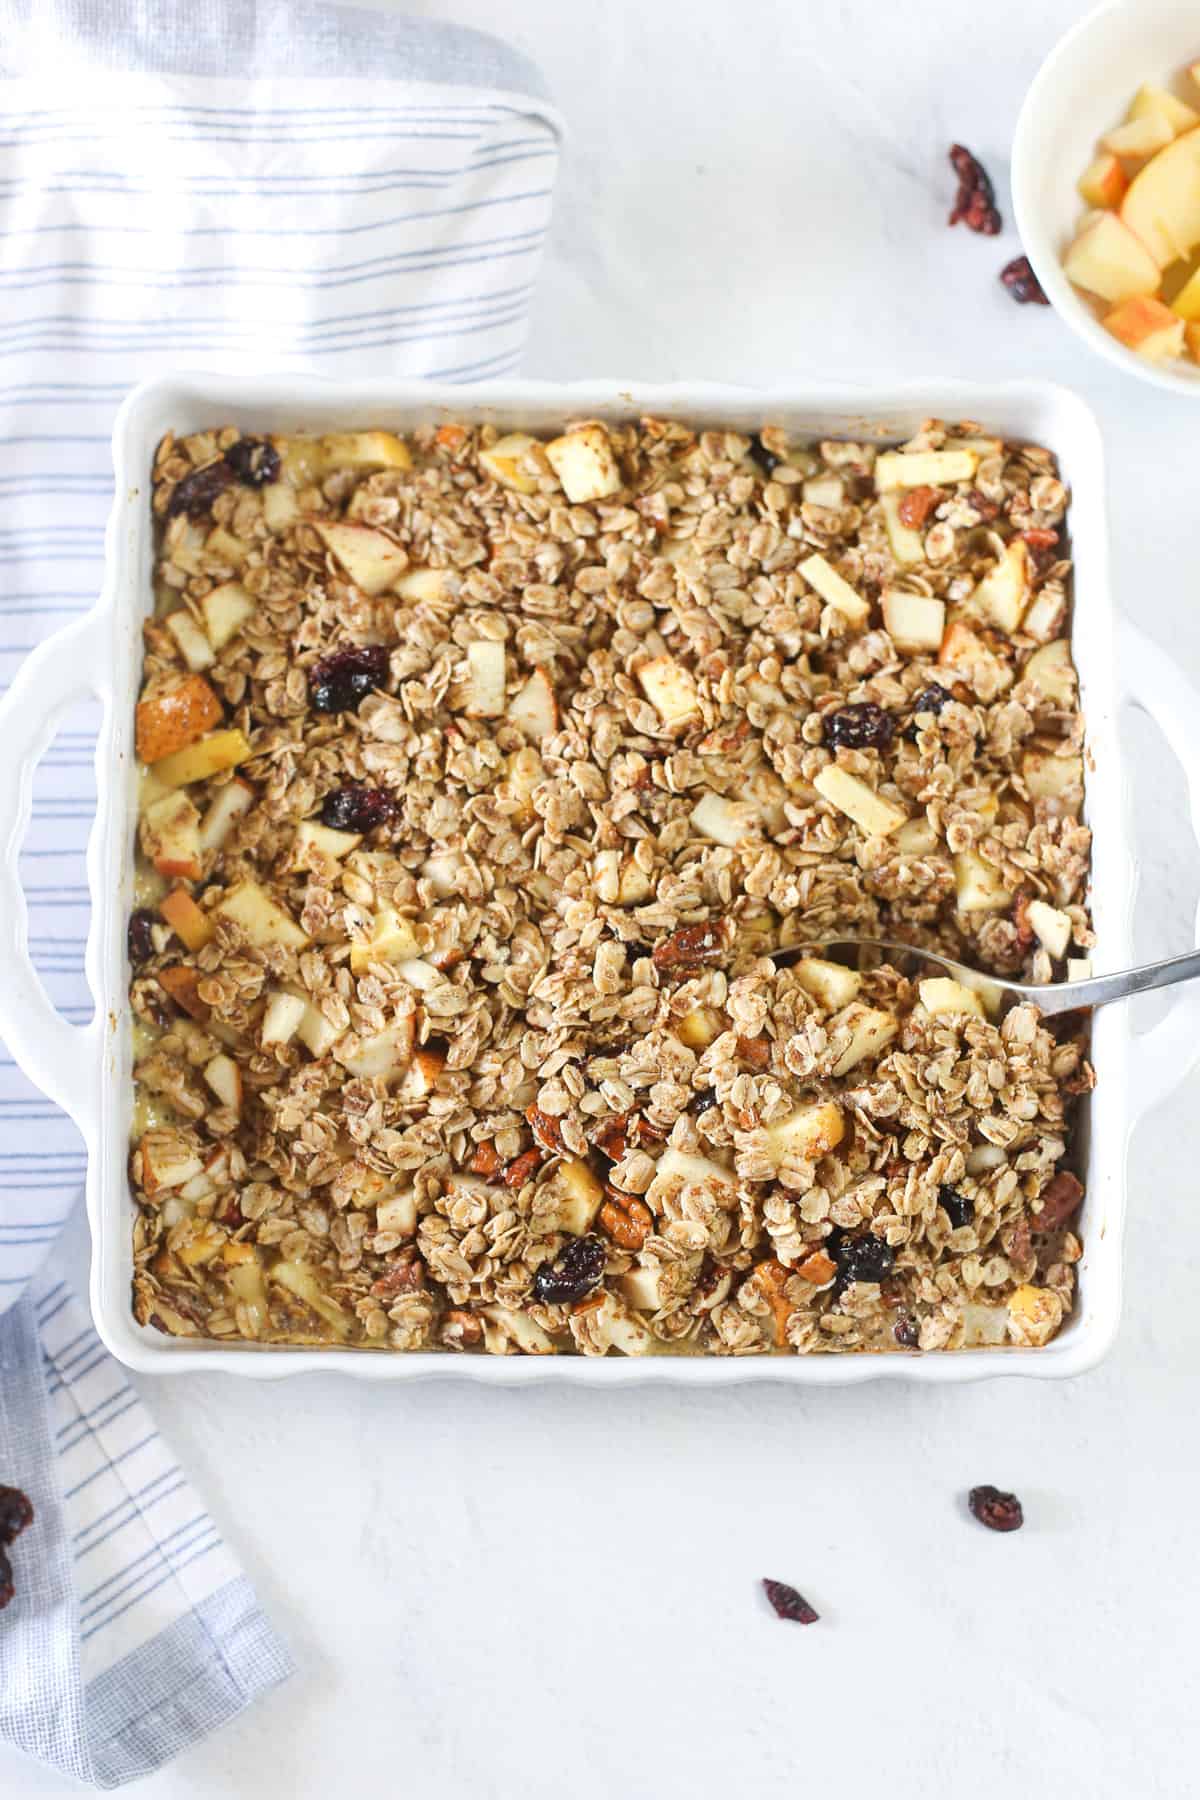 Mixed fruit baked oatmeal in a white casserole dish ready to serve.